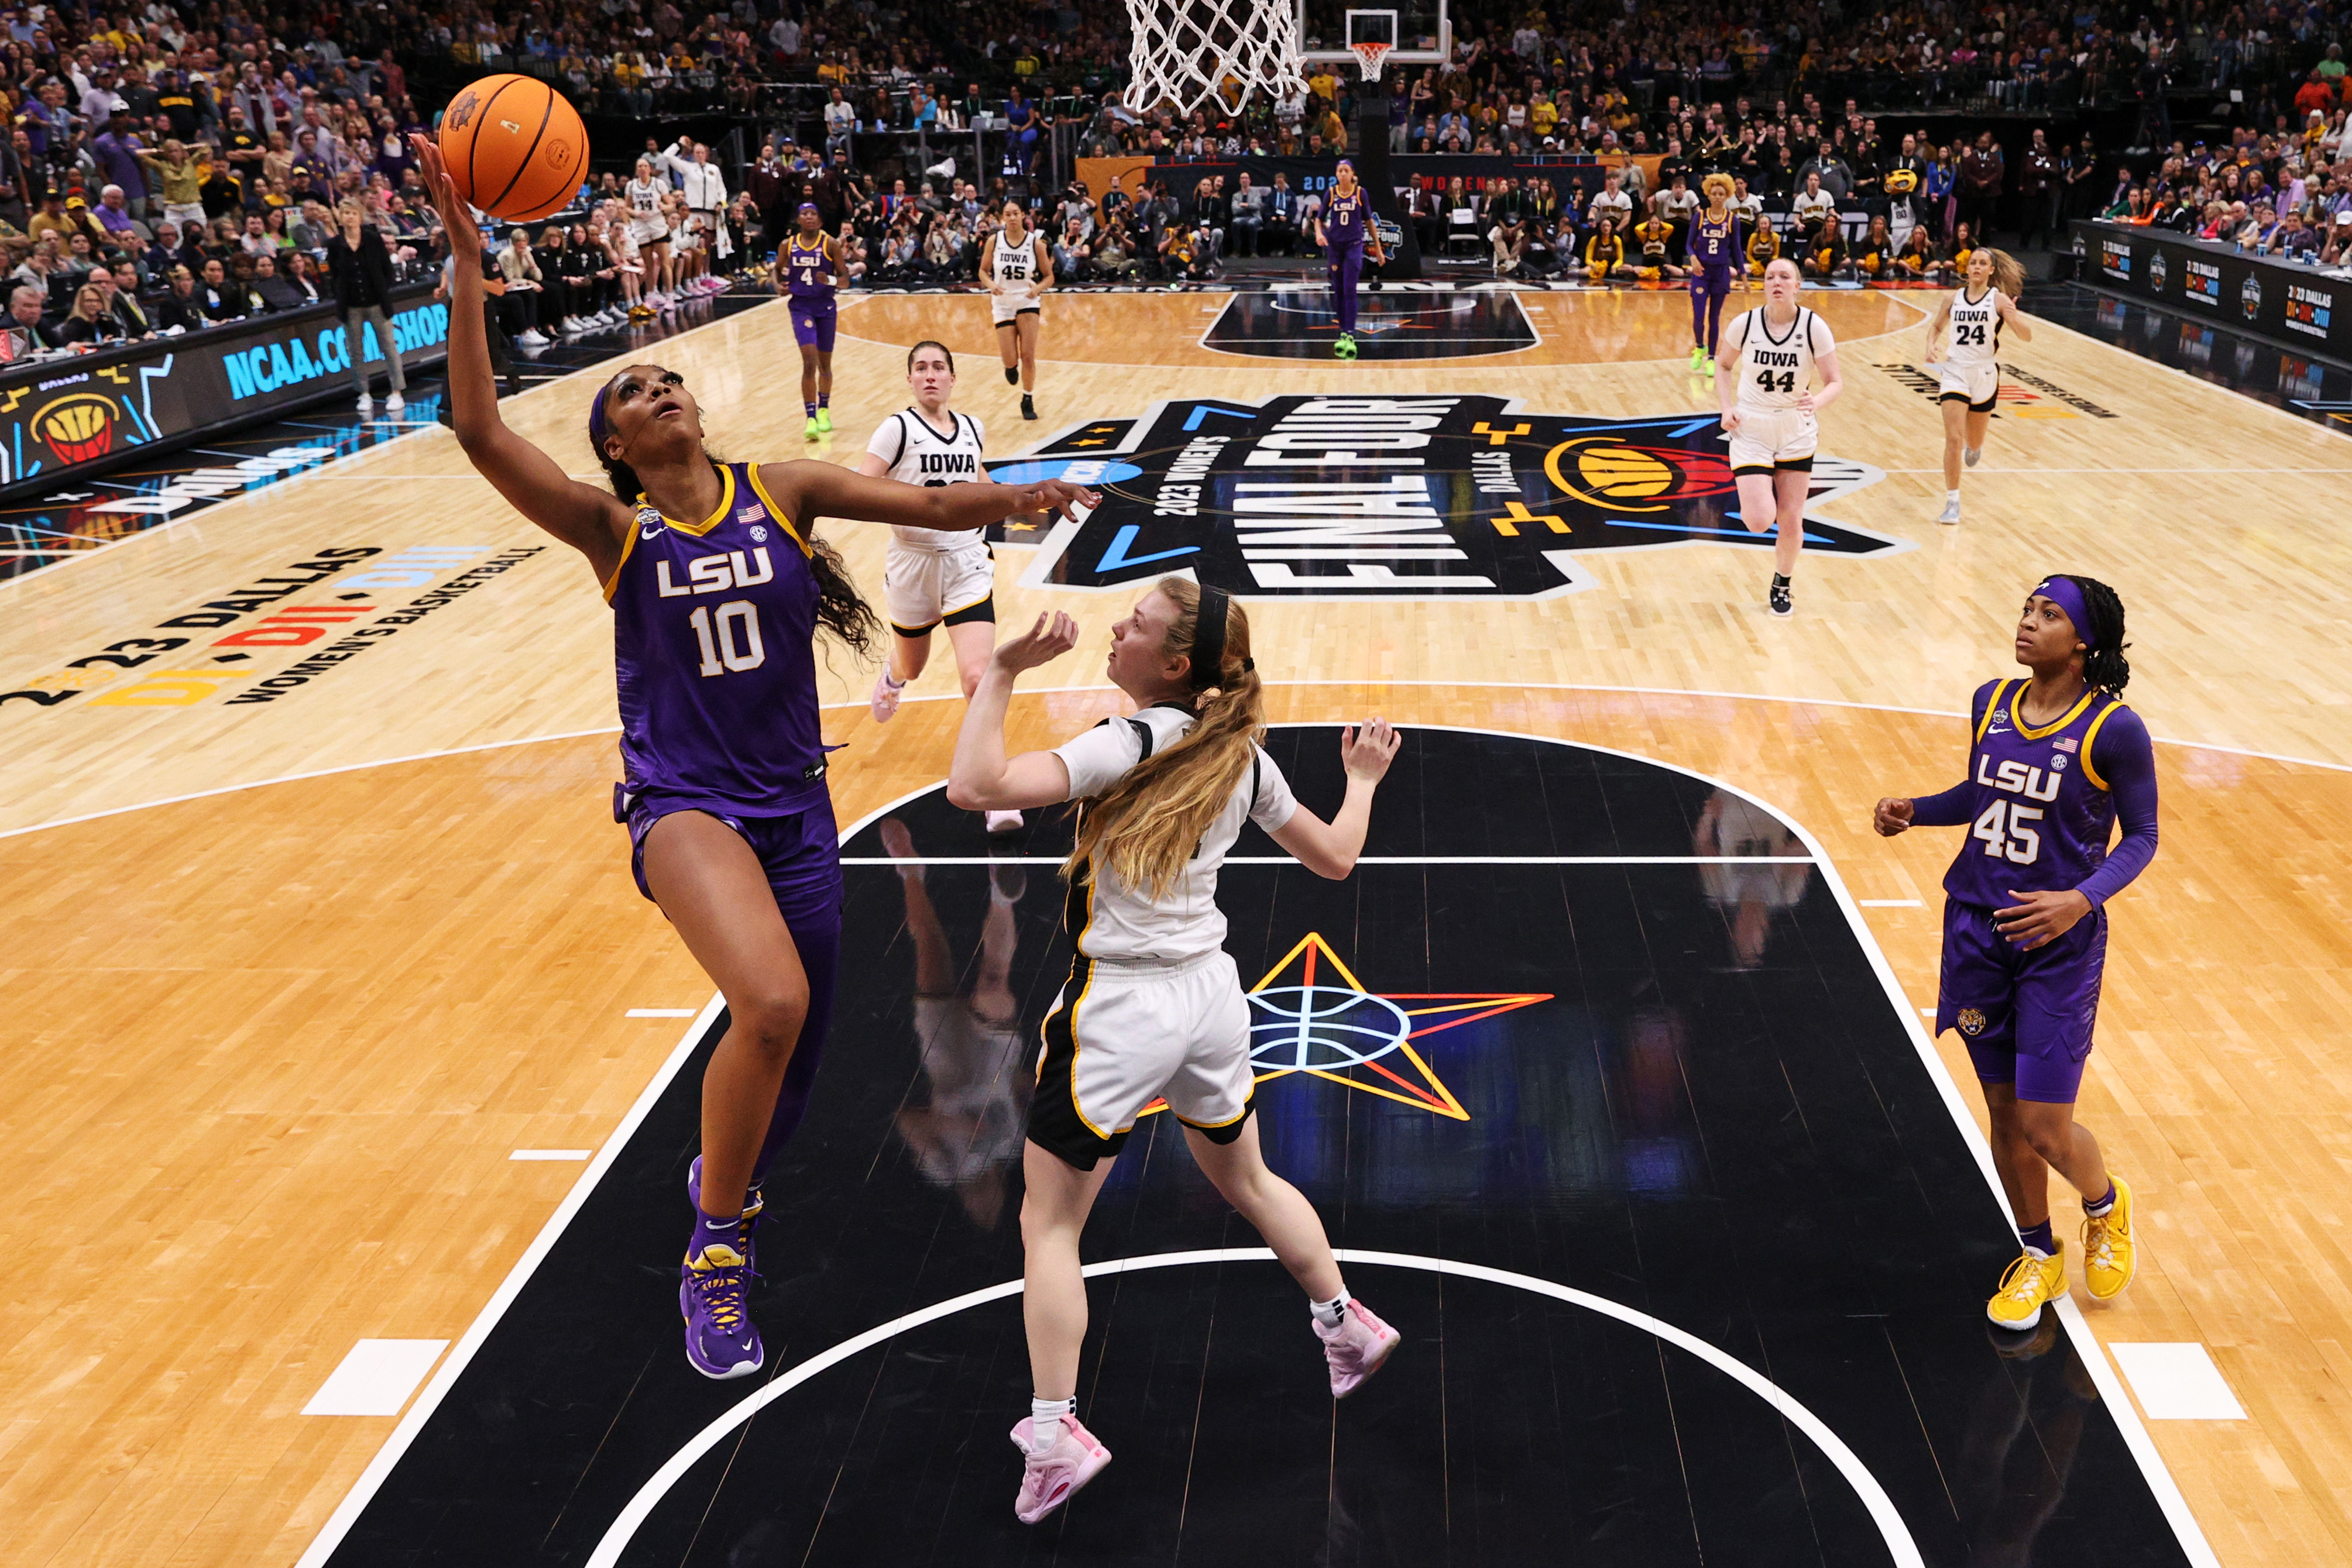 Angel Reese #10 of the LSU Lady Tigers drives to the basket against Molly Davis #1 of the Iowa Hawkeyes during the second half of the 2023 NCAA Women's Basketball Tournament championship game at American Airlines Center in Dallas, Texas, on April 02, 2023. (Maddie Meyer—Getty Images)